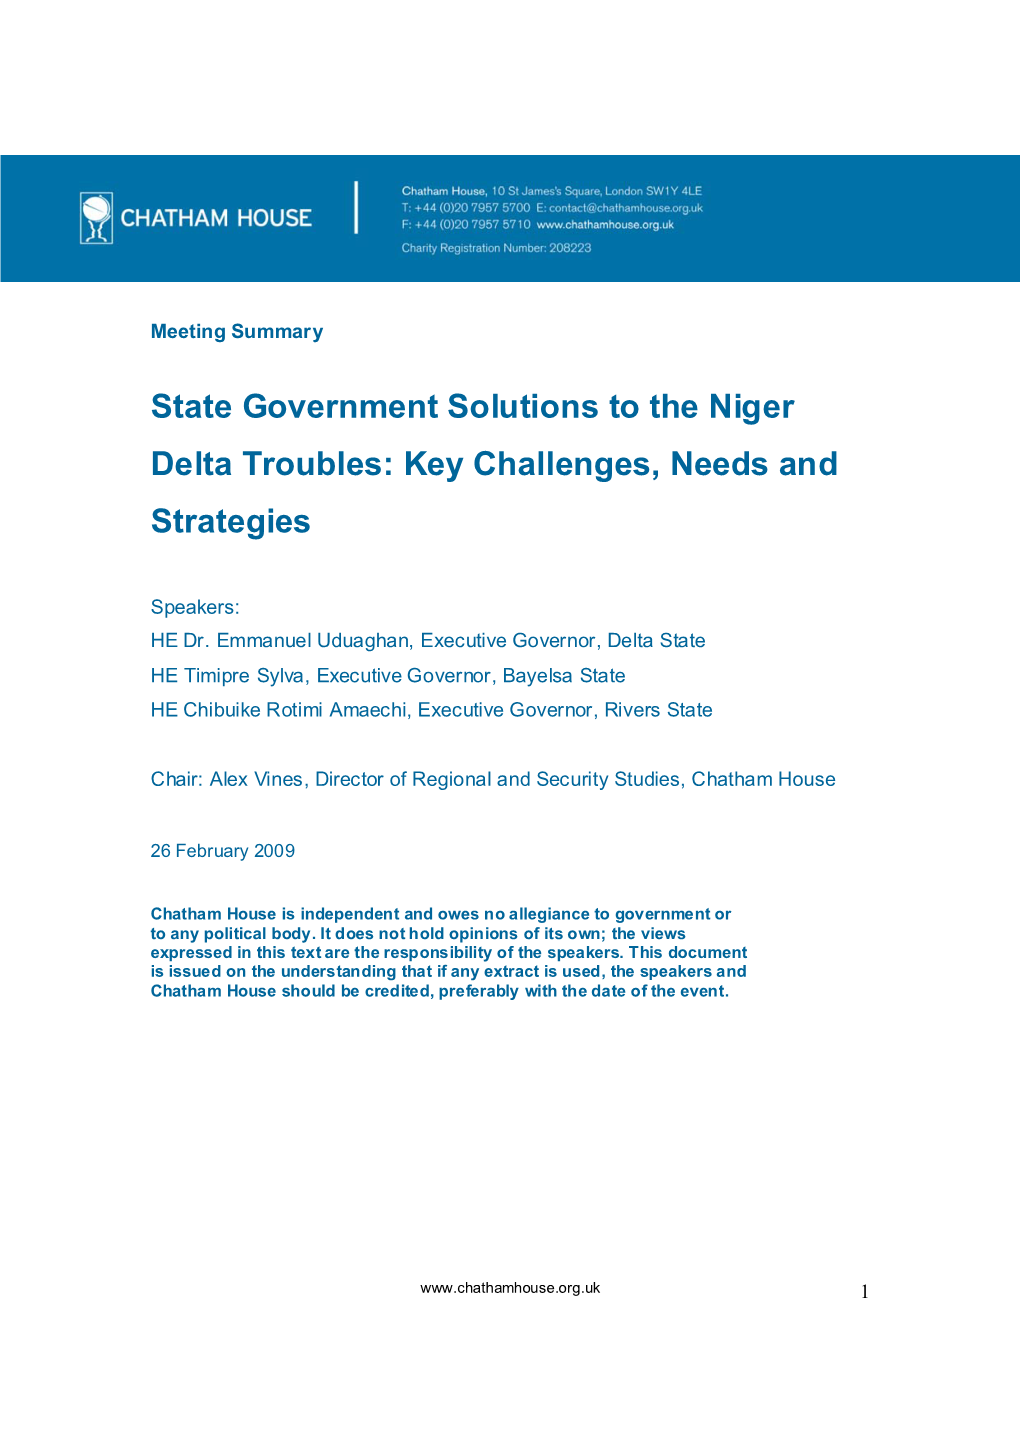 State Government Solutions to the Niger Delta Troubles: Key Challenges, Needs and Strategies